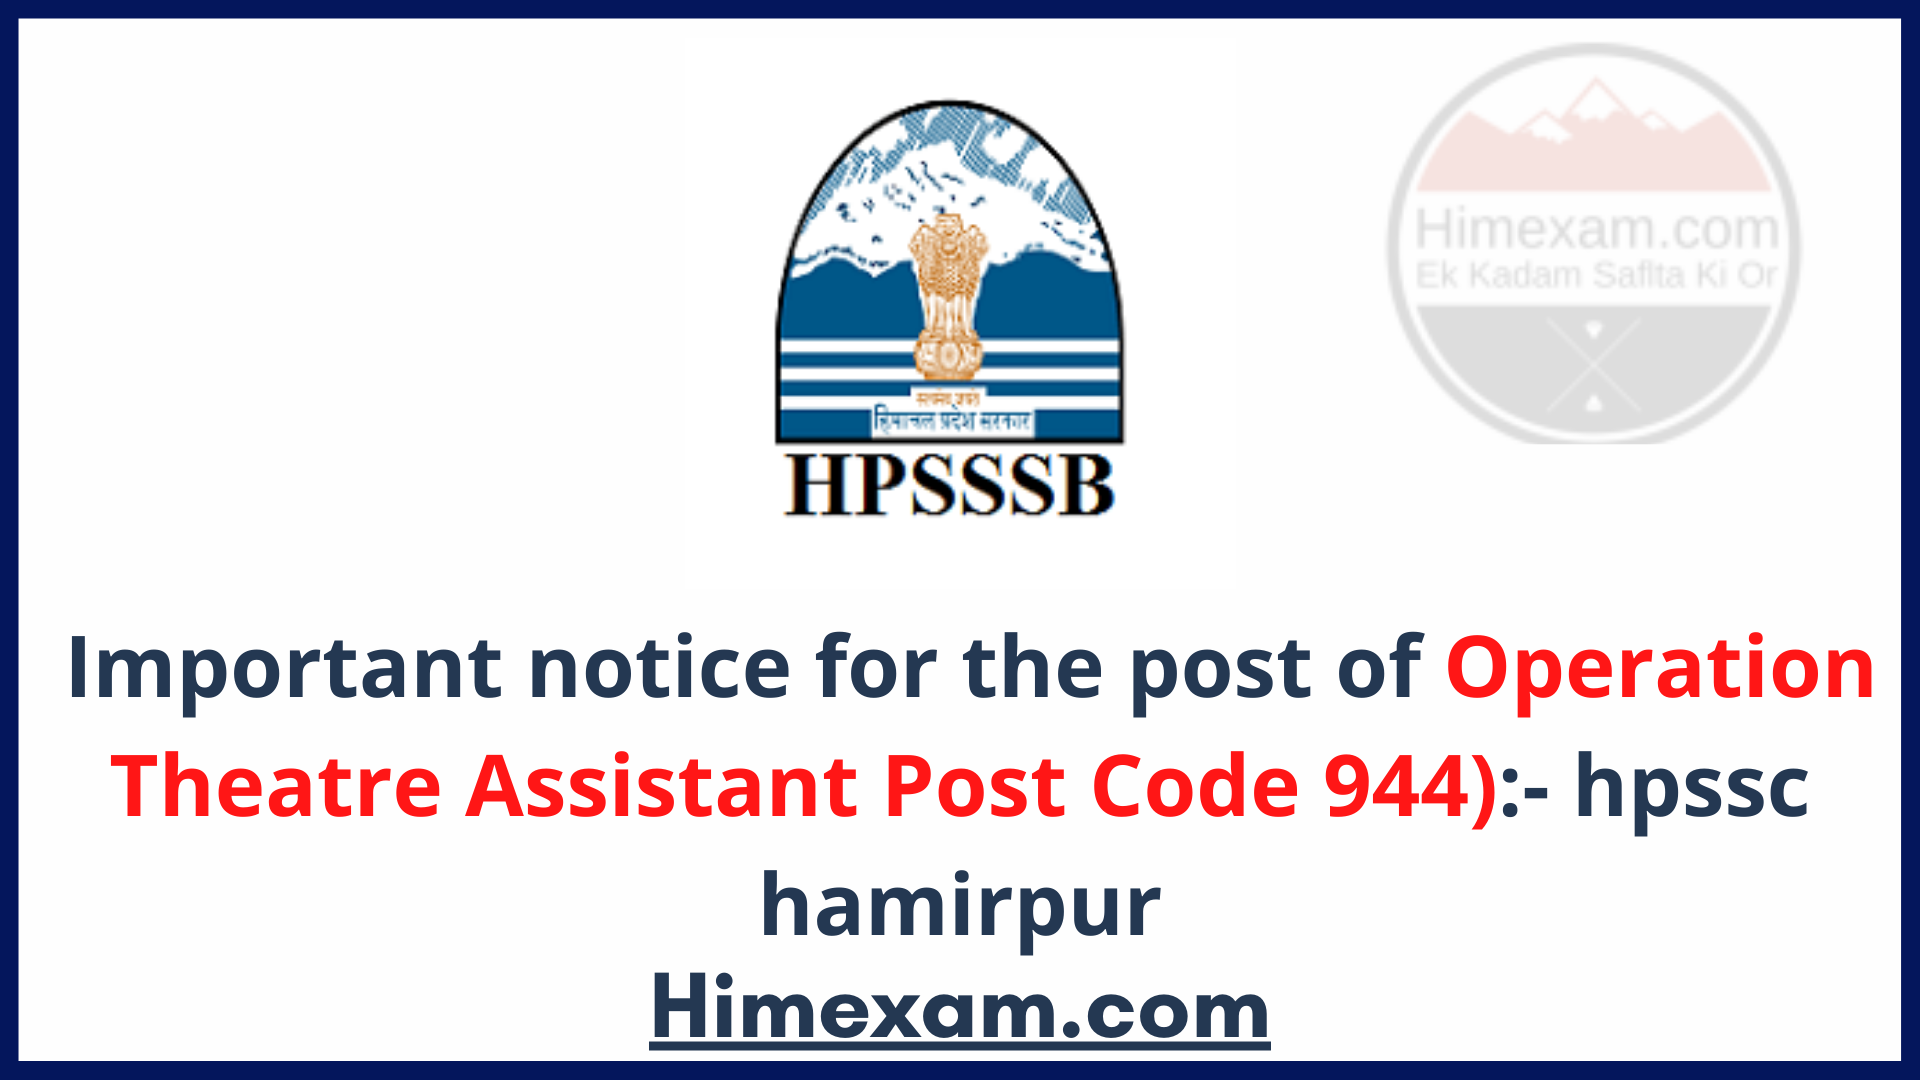 ||Important notice for the post of Operation Theatre Assistant Gost Code 944):- hpssc hamirpur||Important notice for the post of Operation Theatre Assistant Post Code 944):- hpsssb hamirpur||